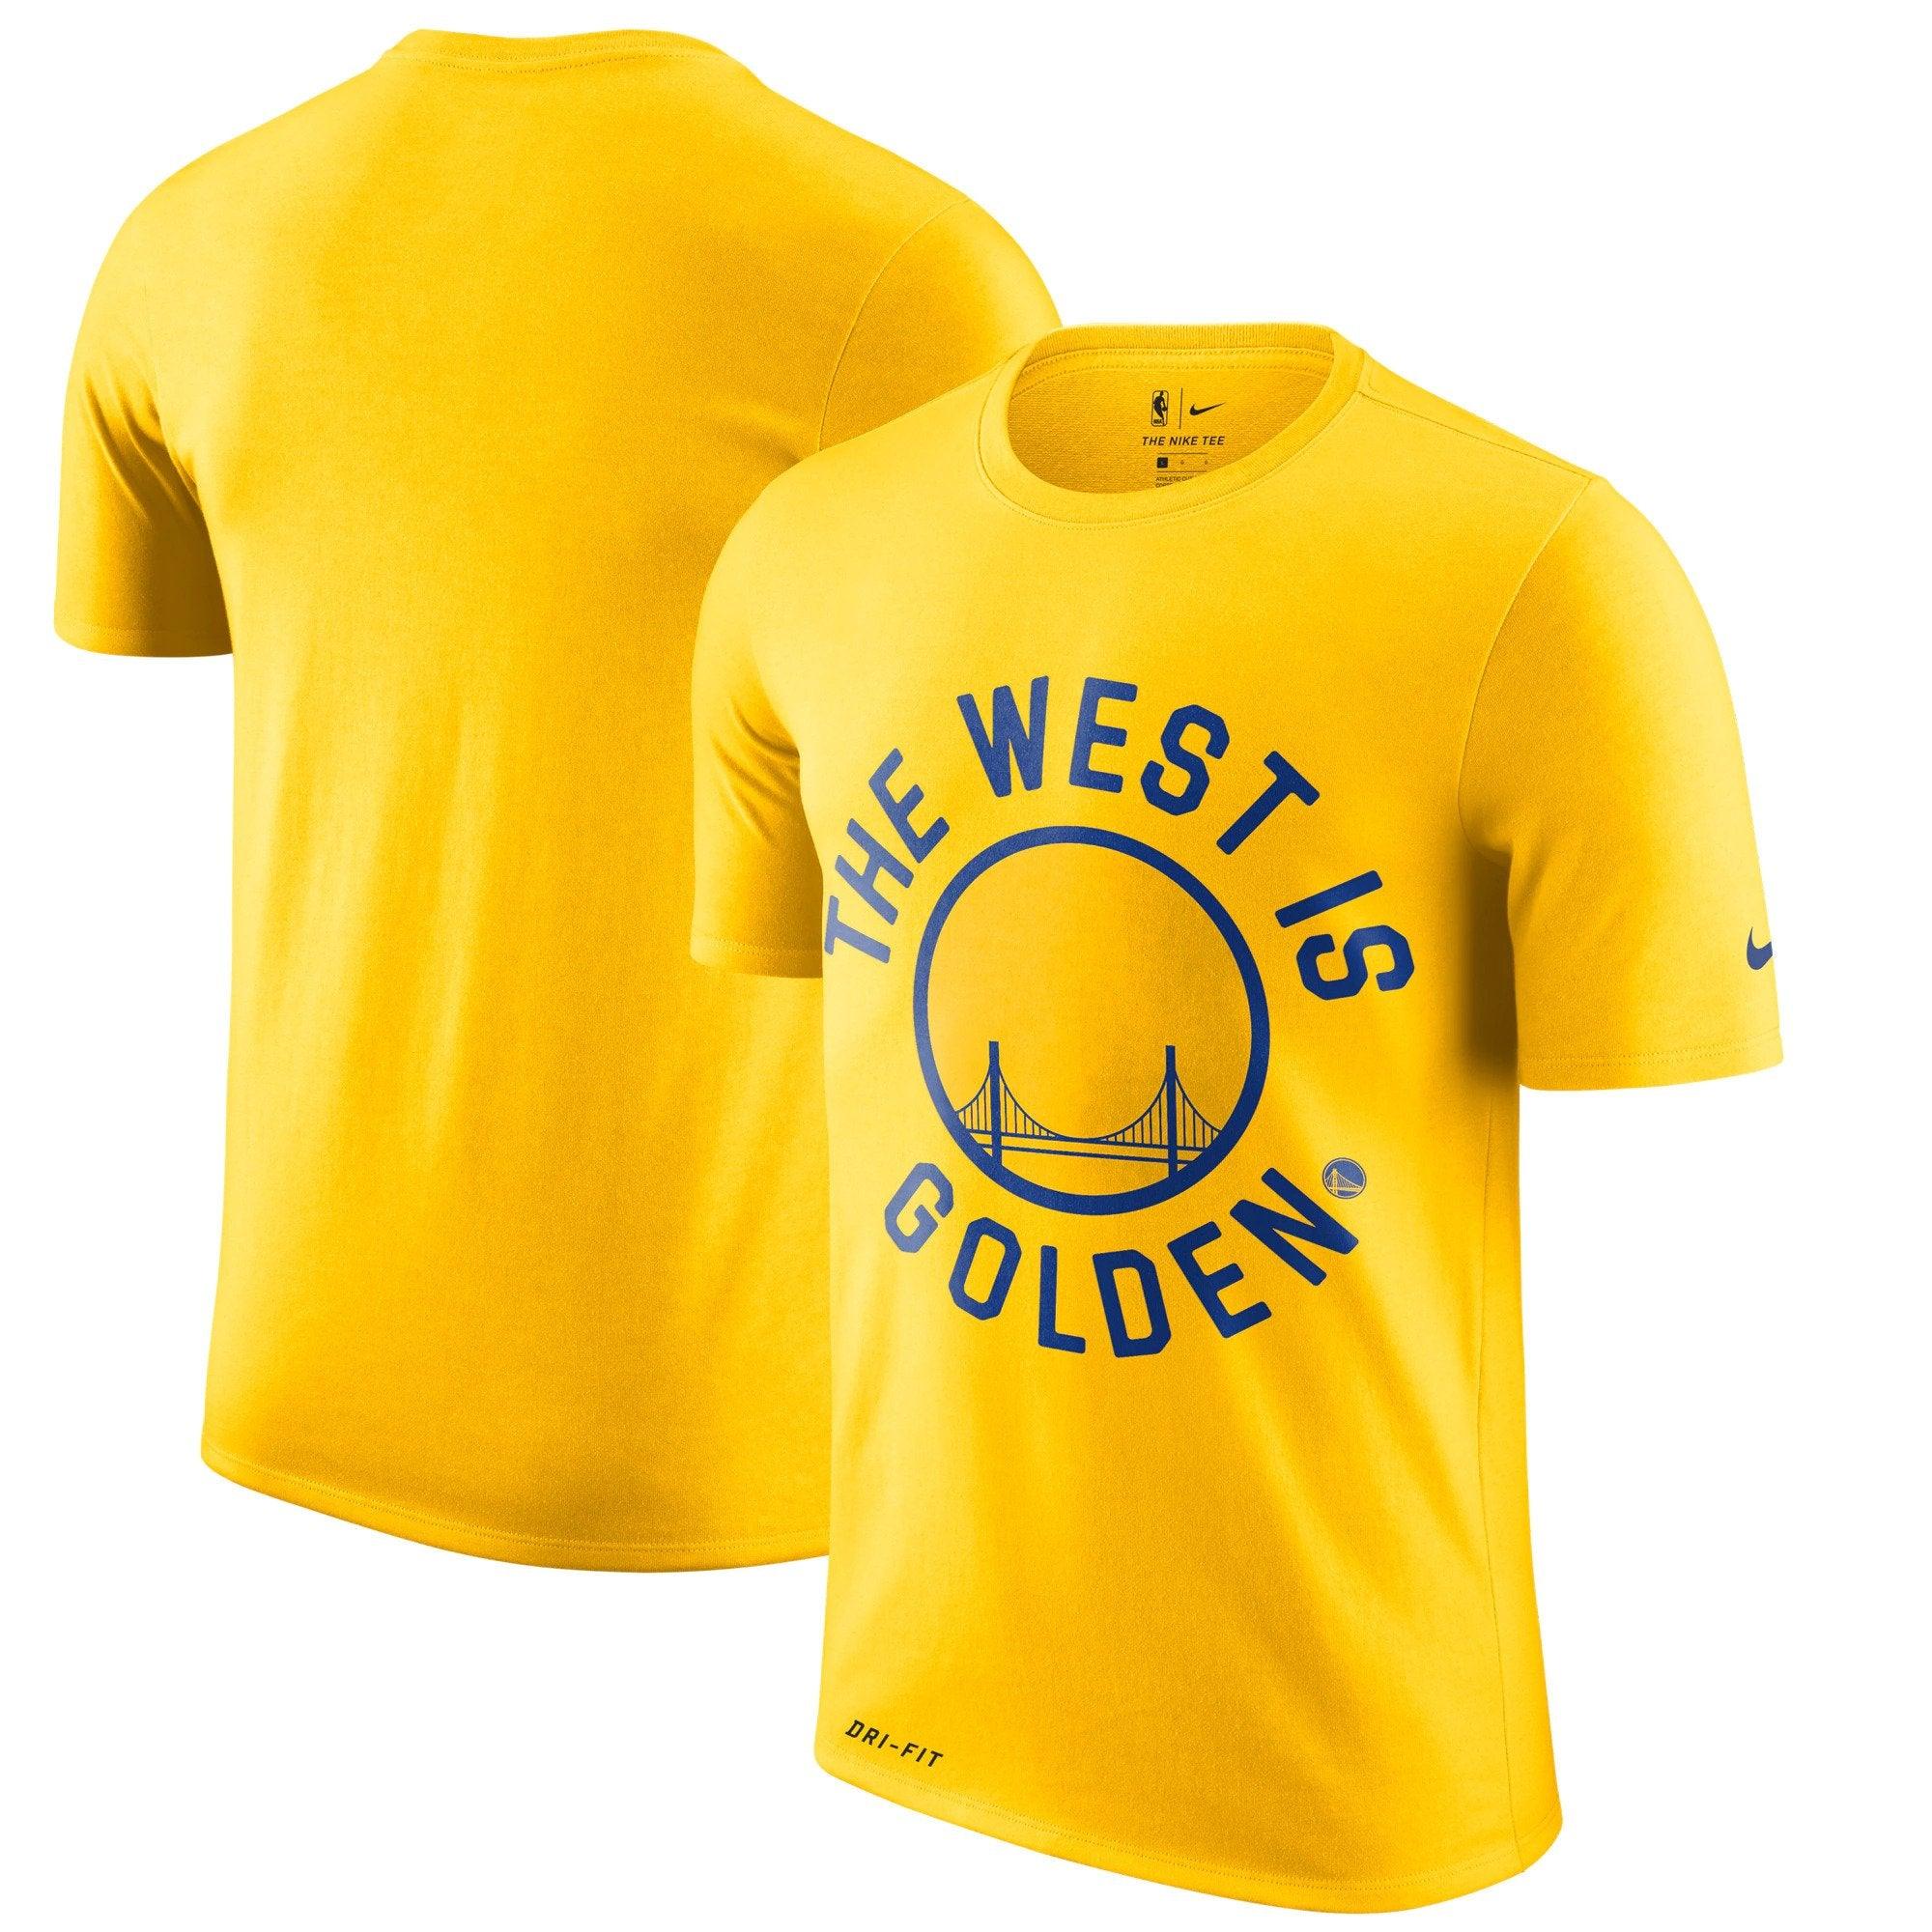 Golden State Warriors. Nike IN